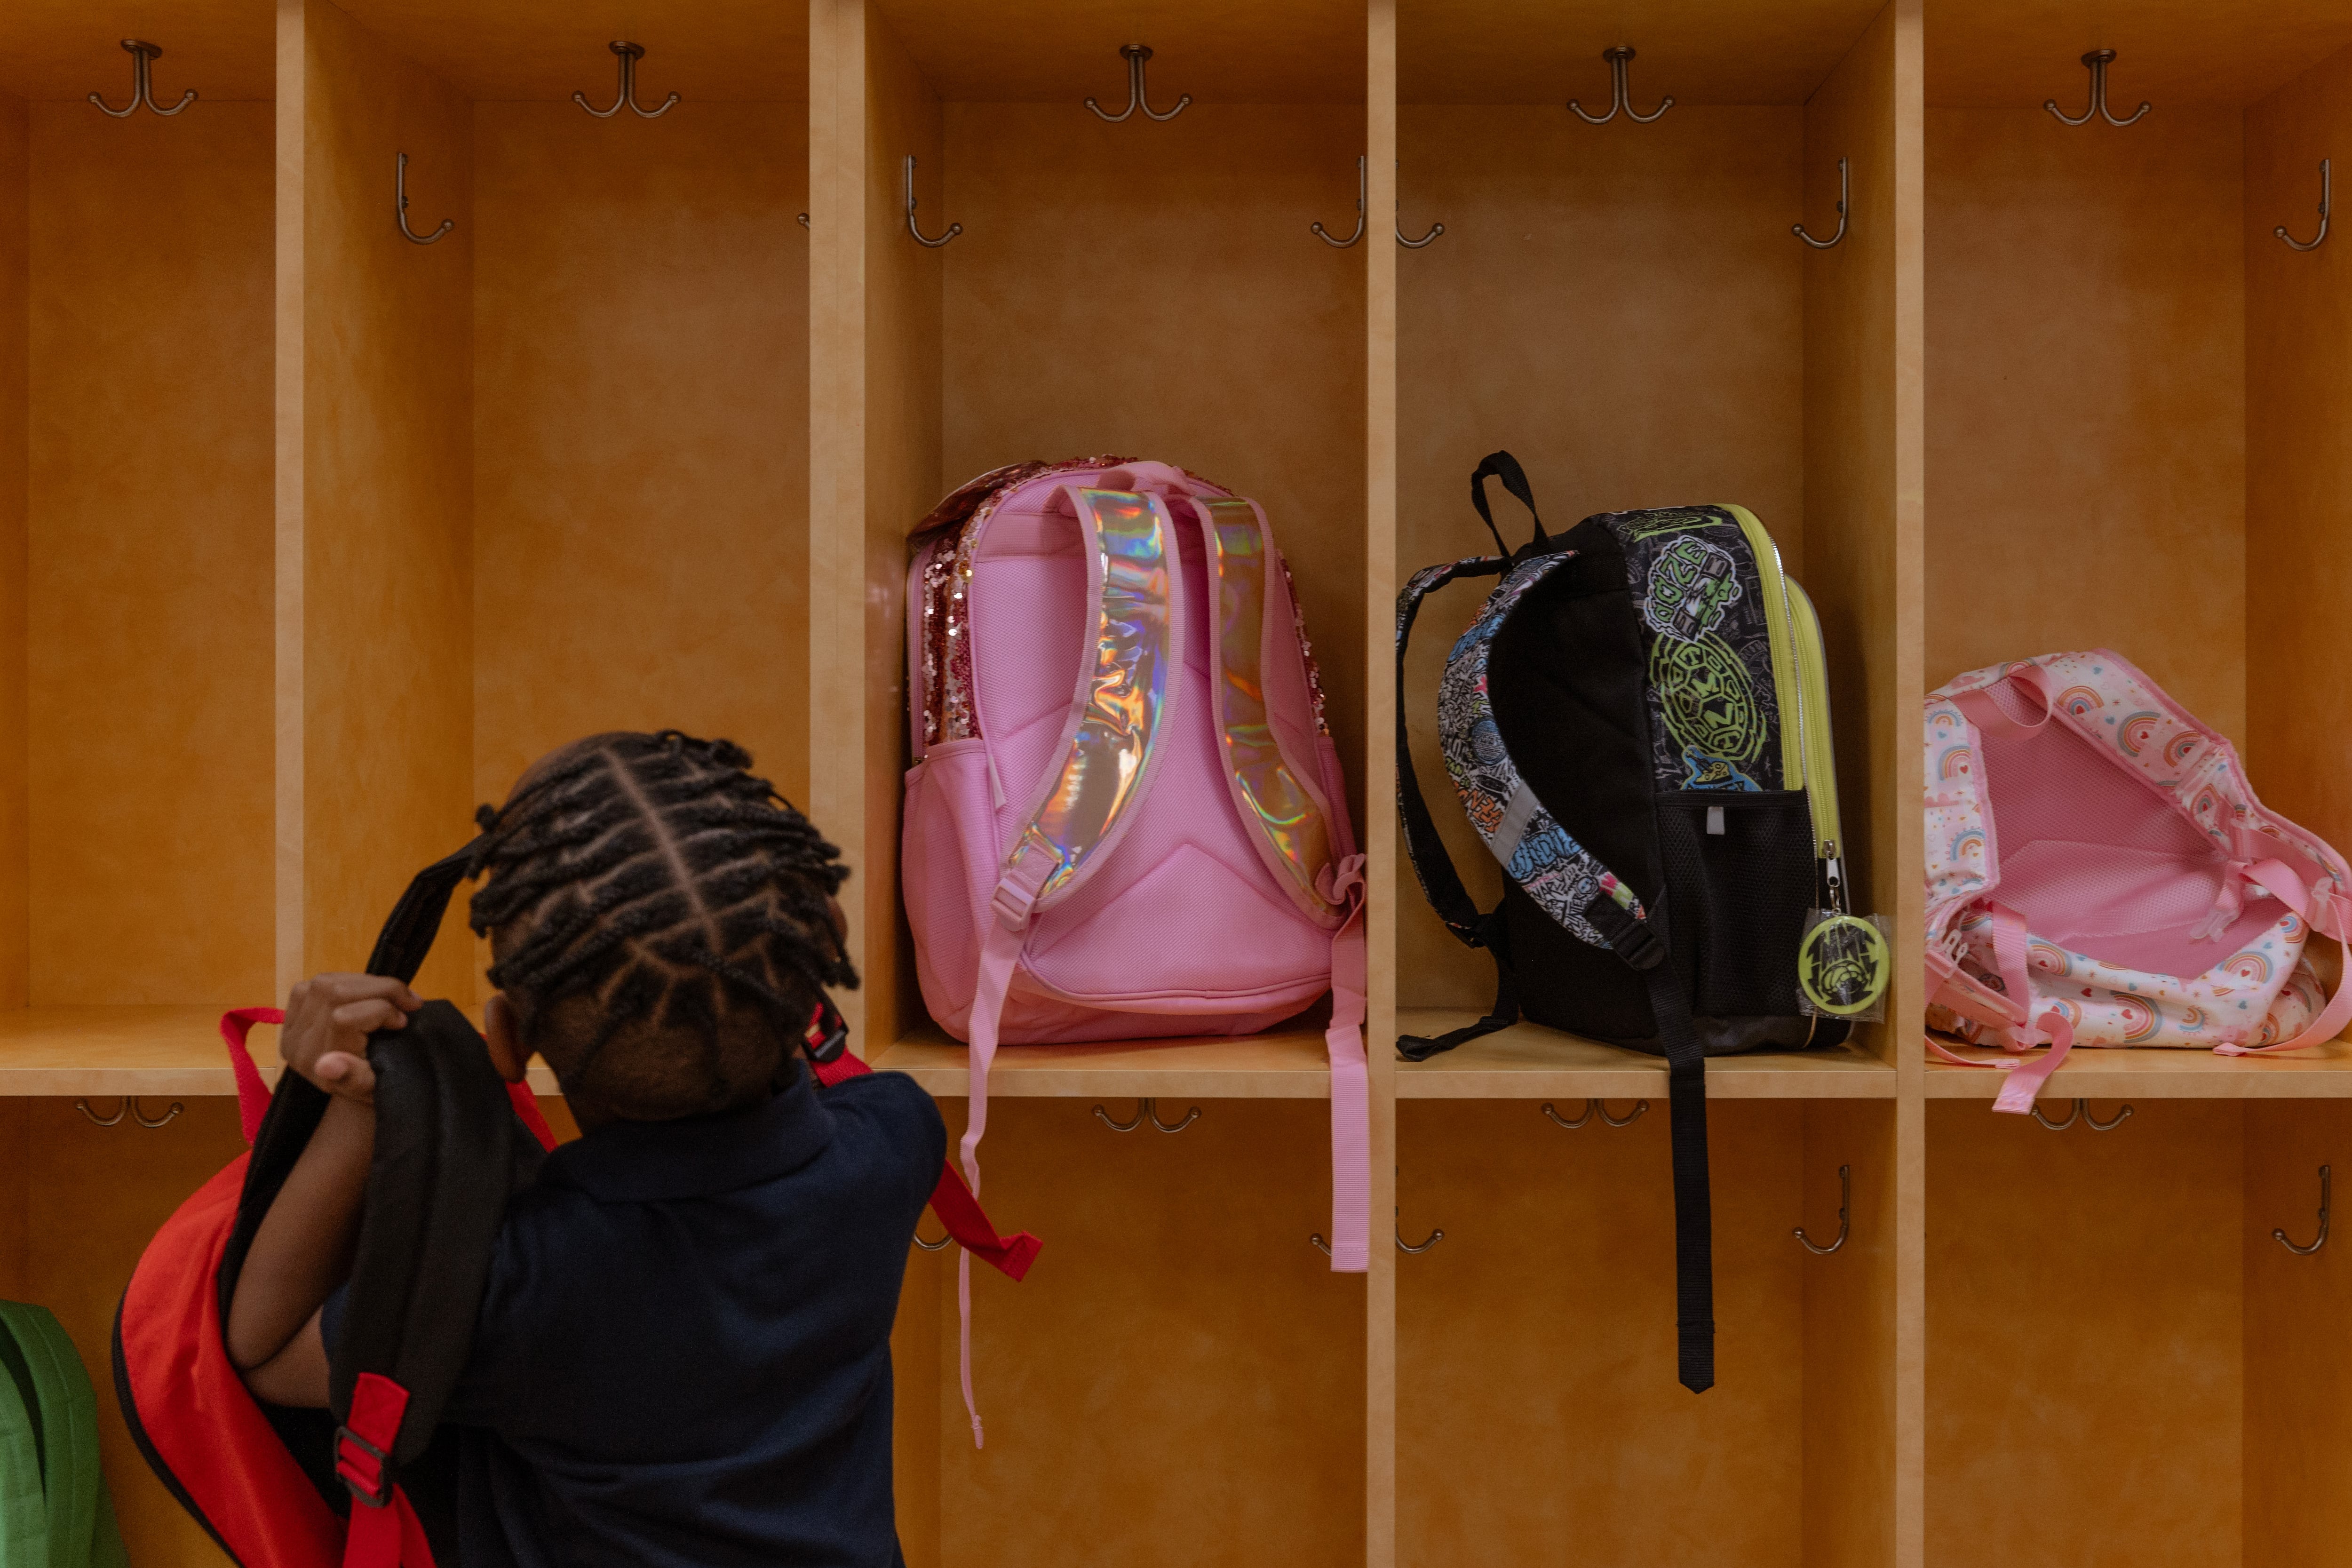 A view of the back of a student putting their backpack away next to other backpacks on a wooden cubby.